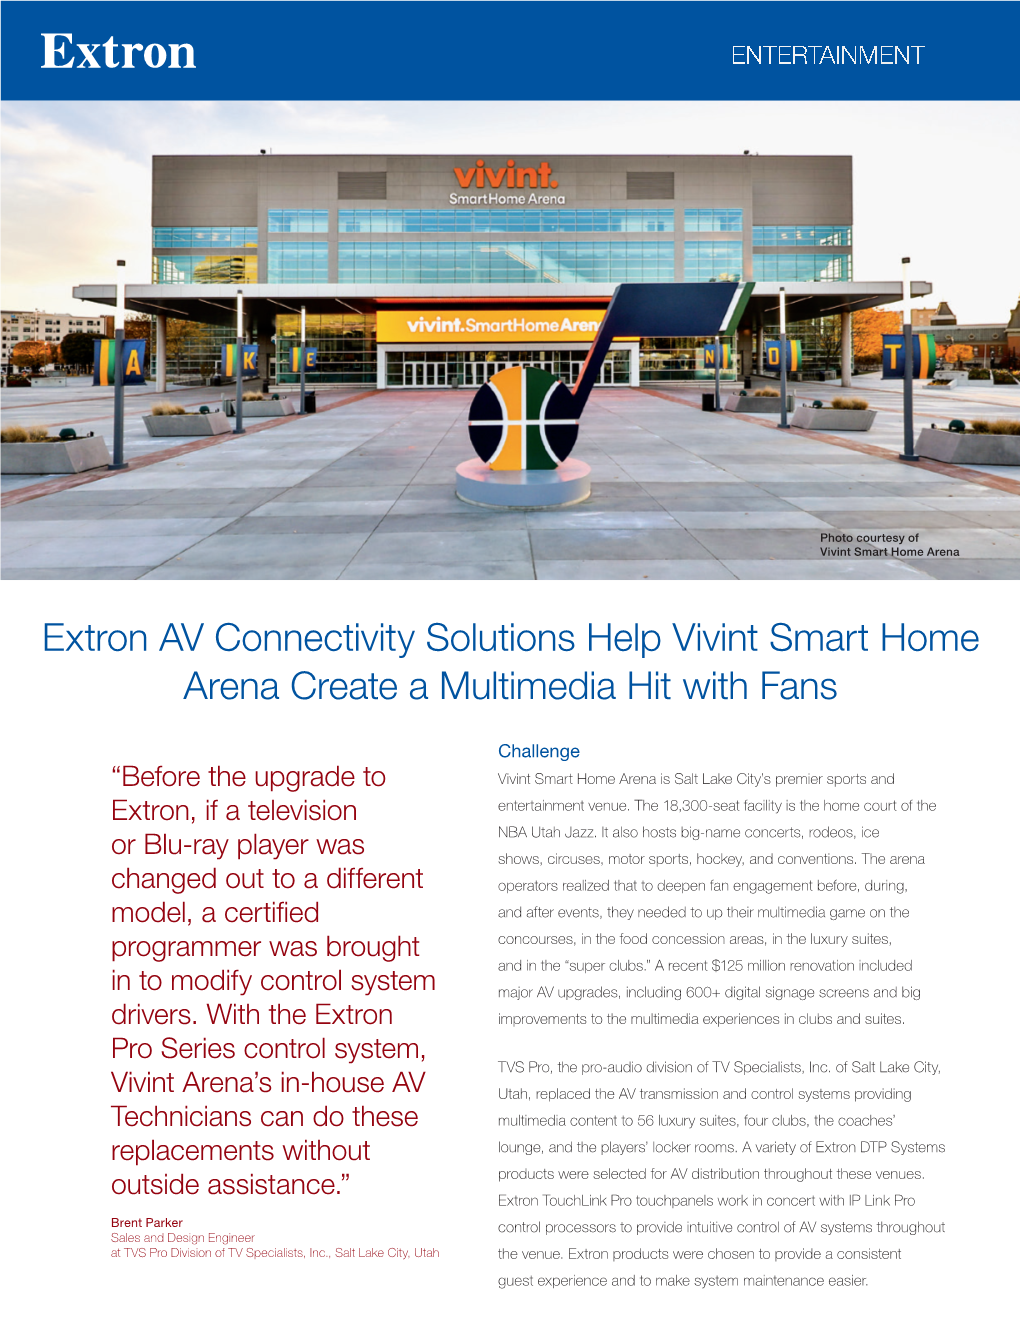 Extron AV Connectivity Solutions Help Vivint Smart Home Arena Create a Multimedia Hit with Fans